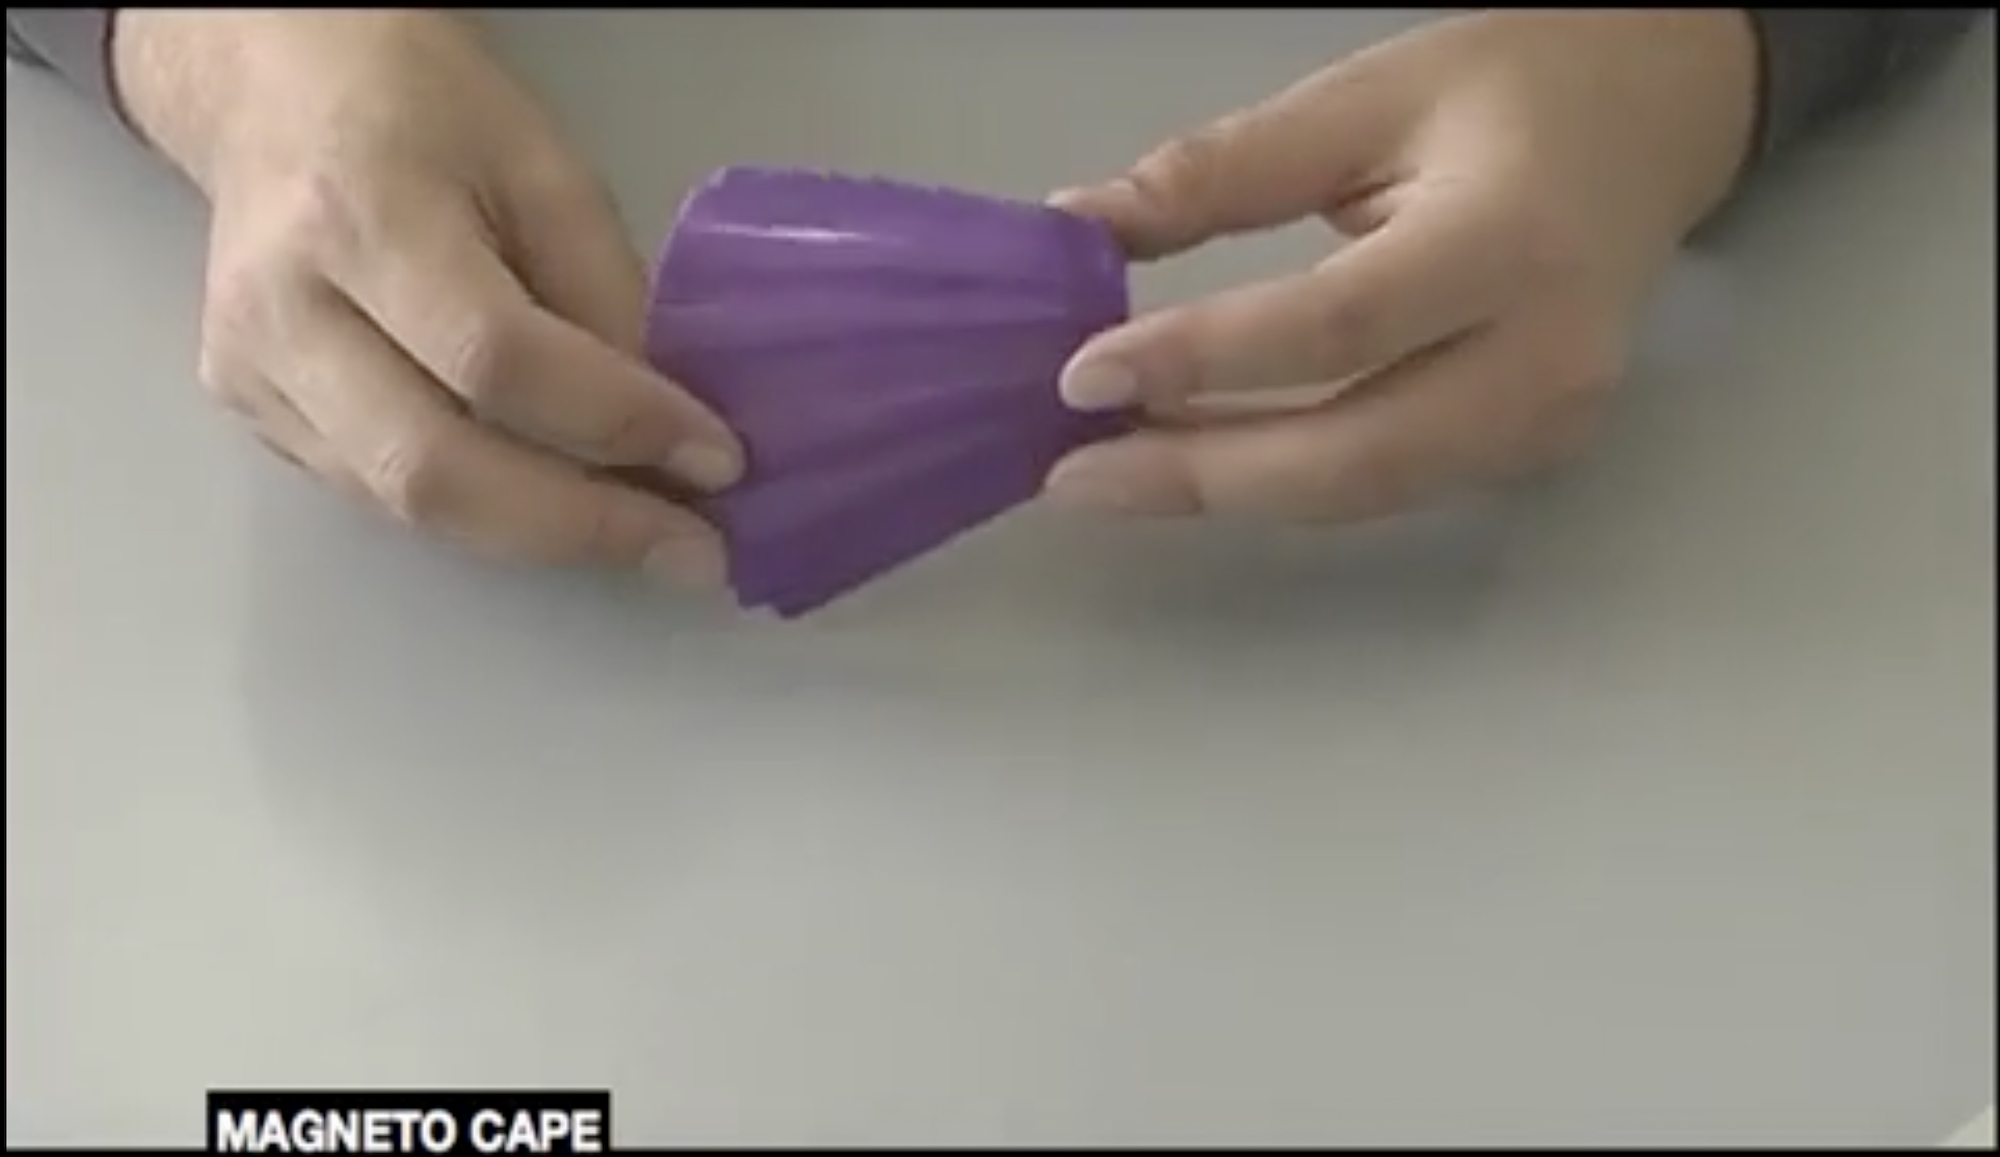 Hands hold a purple object with the caption 